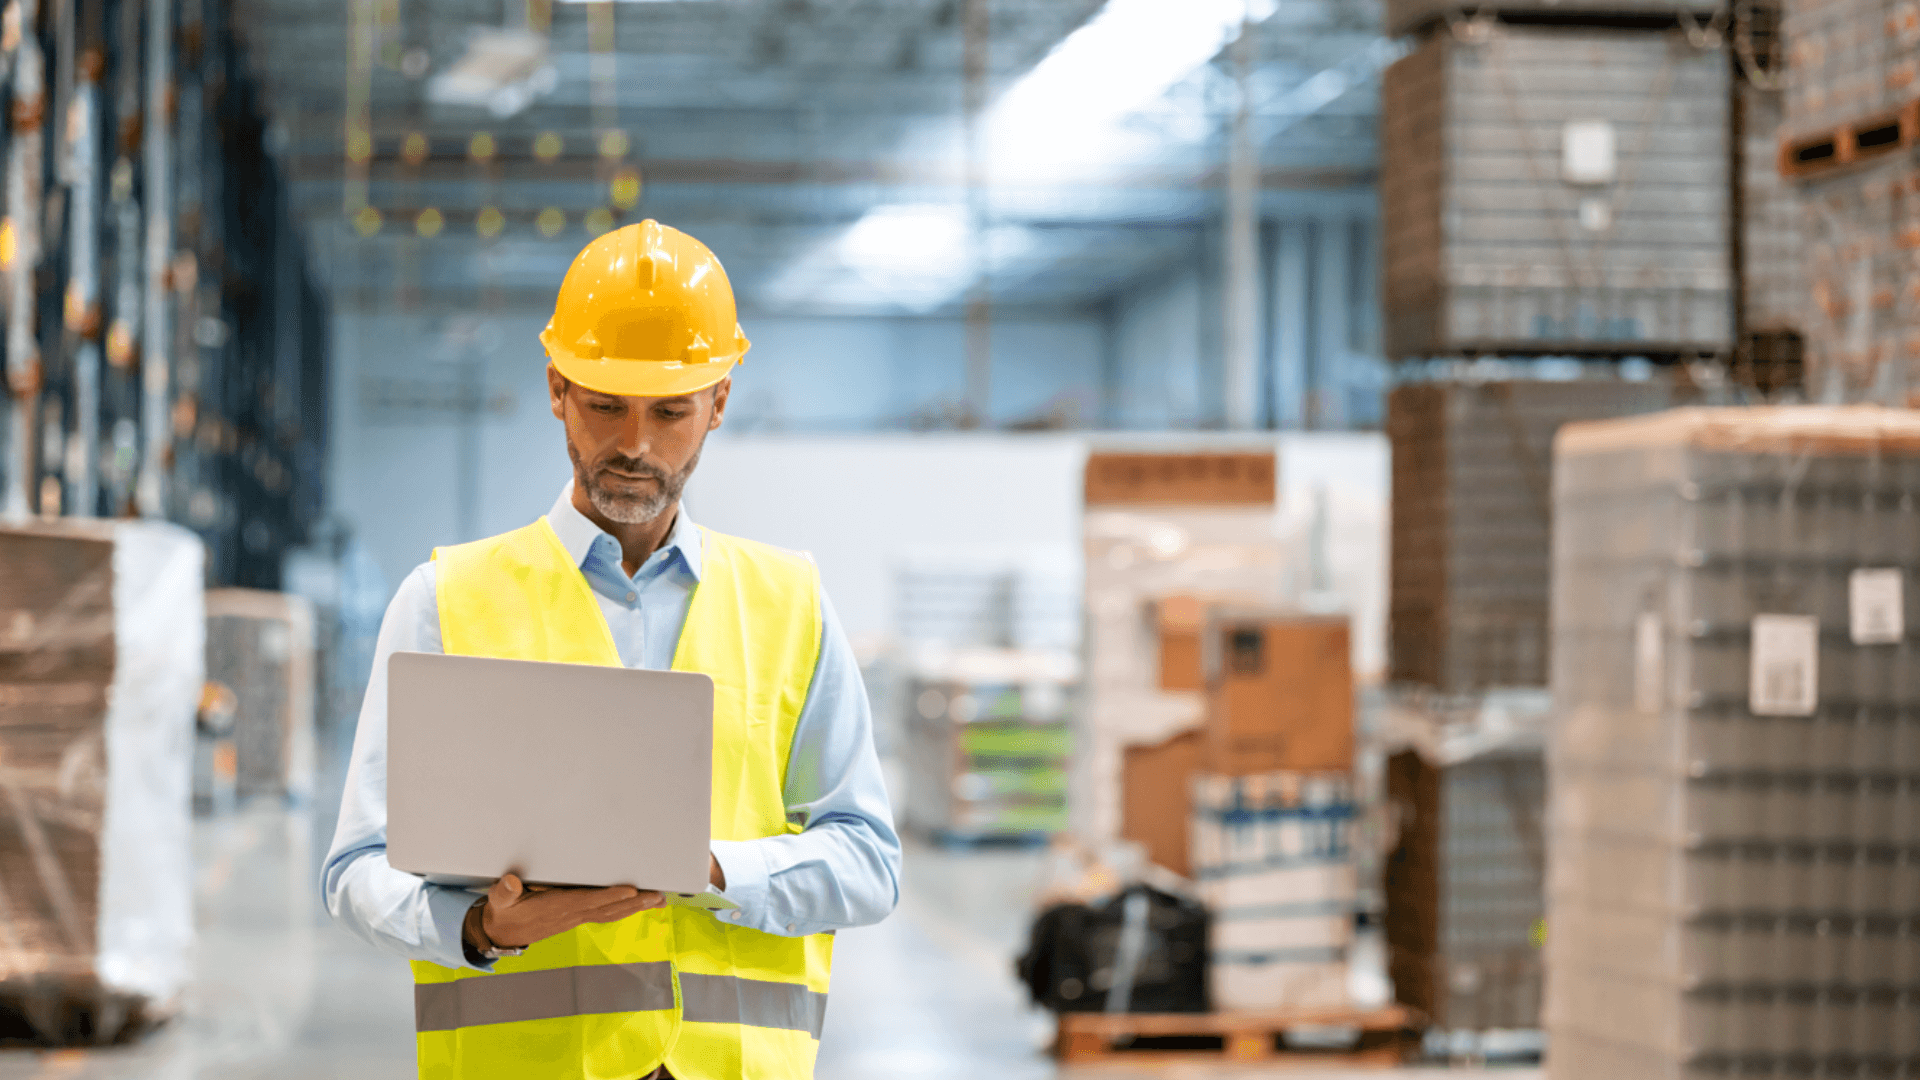 Why You Need an Inventory Management Solution as You Grow Your Business